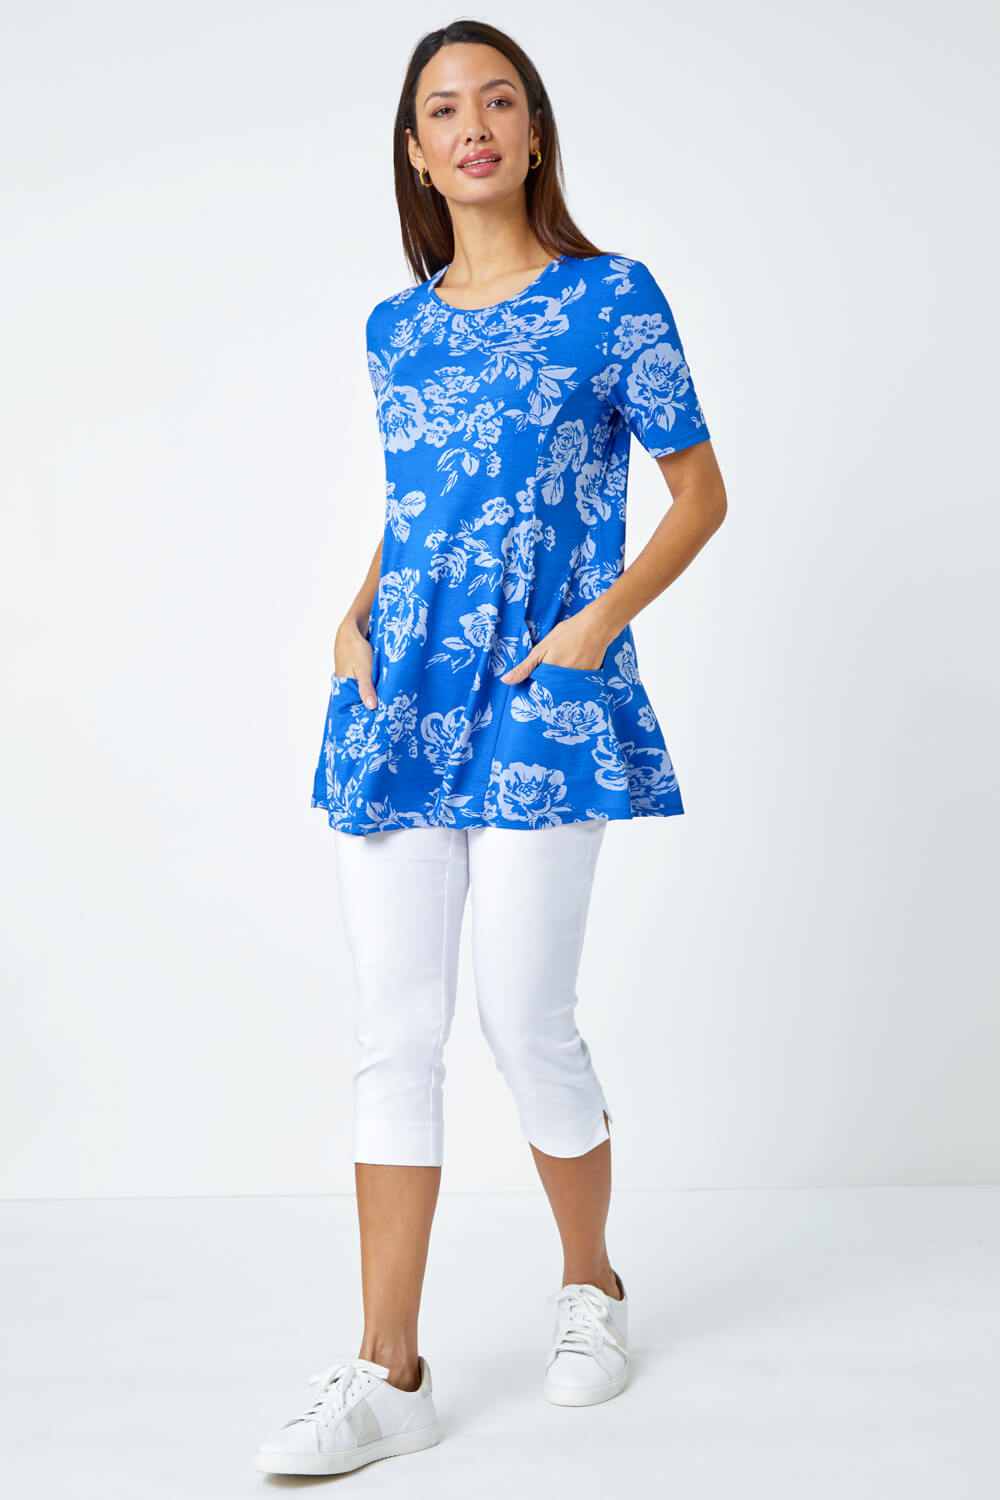 Blue Floral Print Stretch Tunic Pocket Top, Image 2 of 5